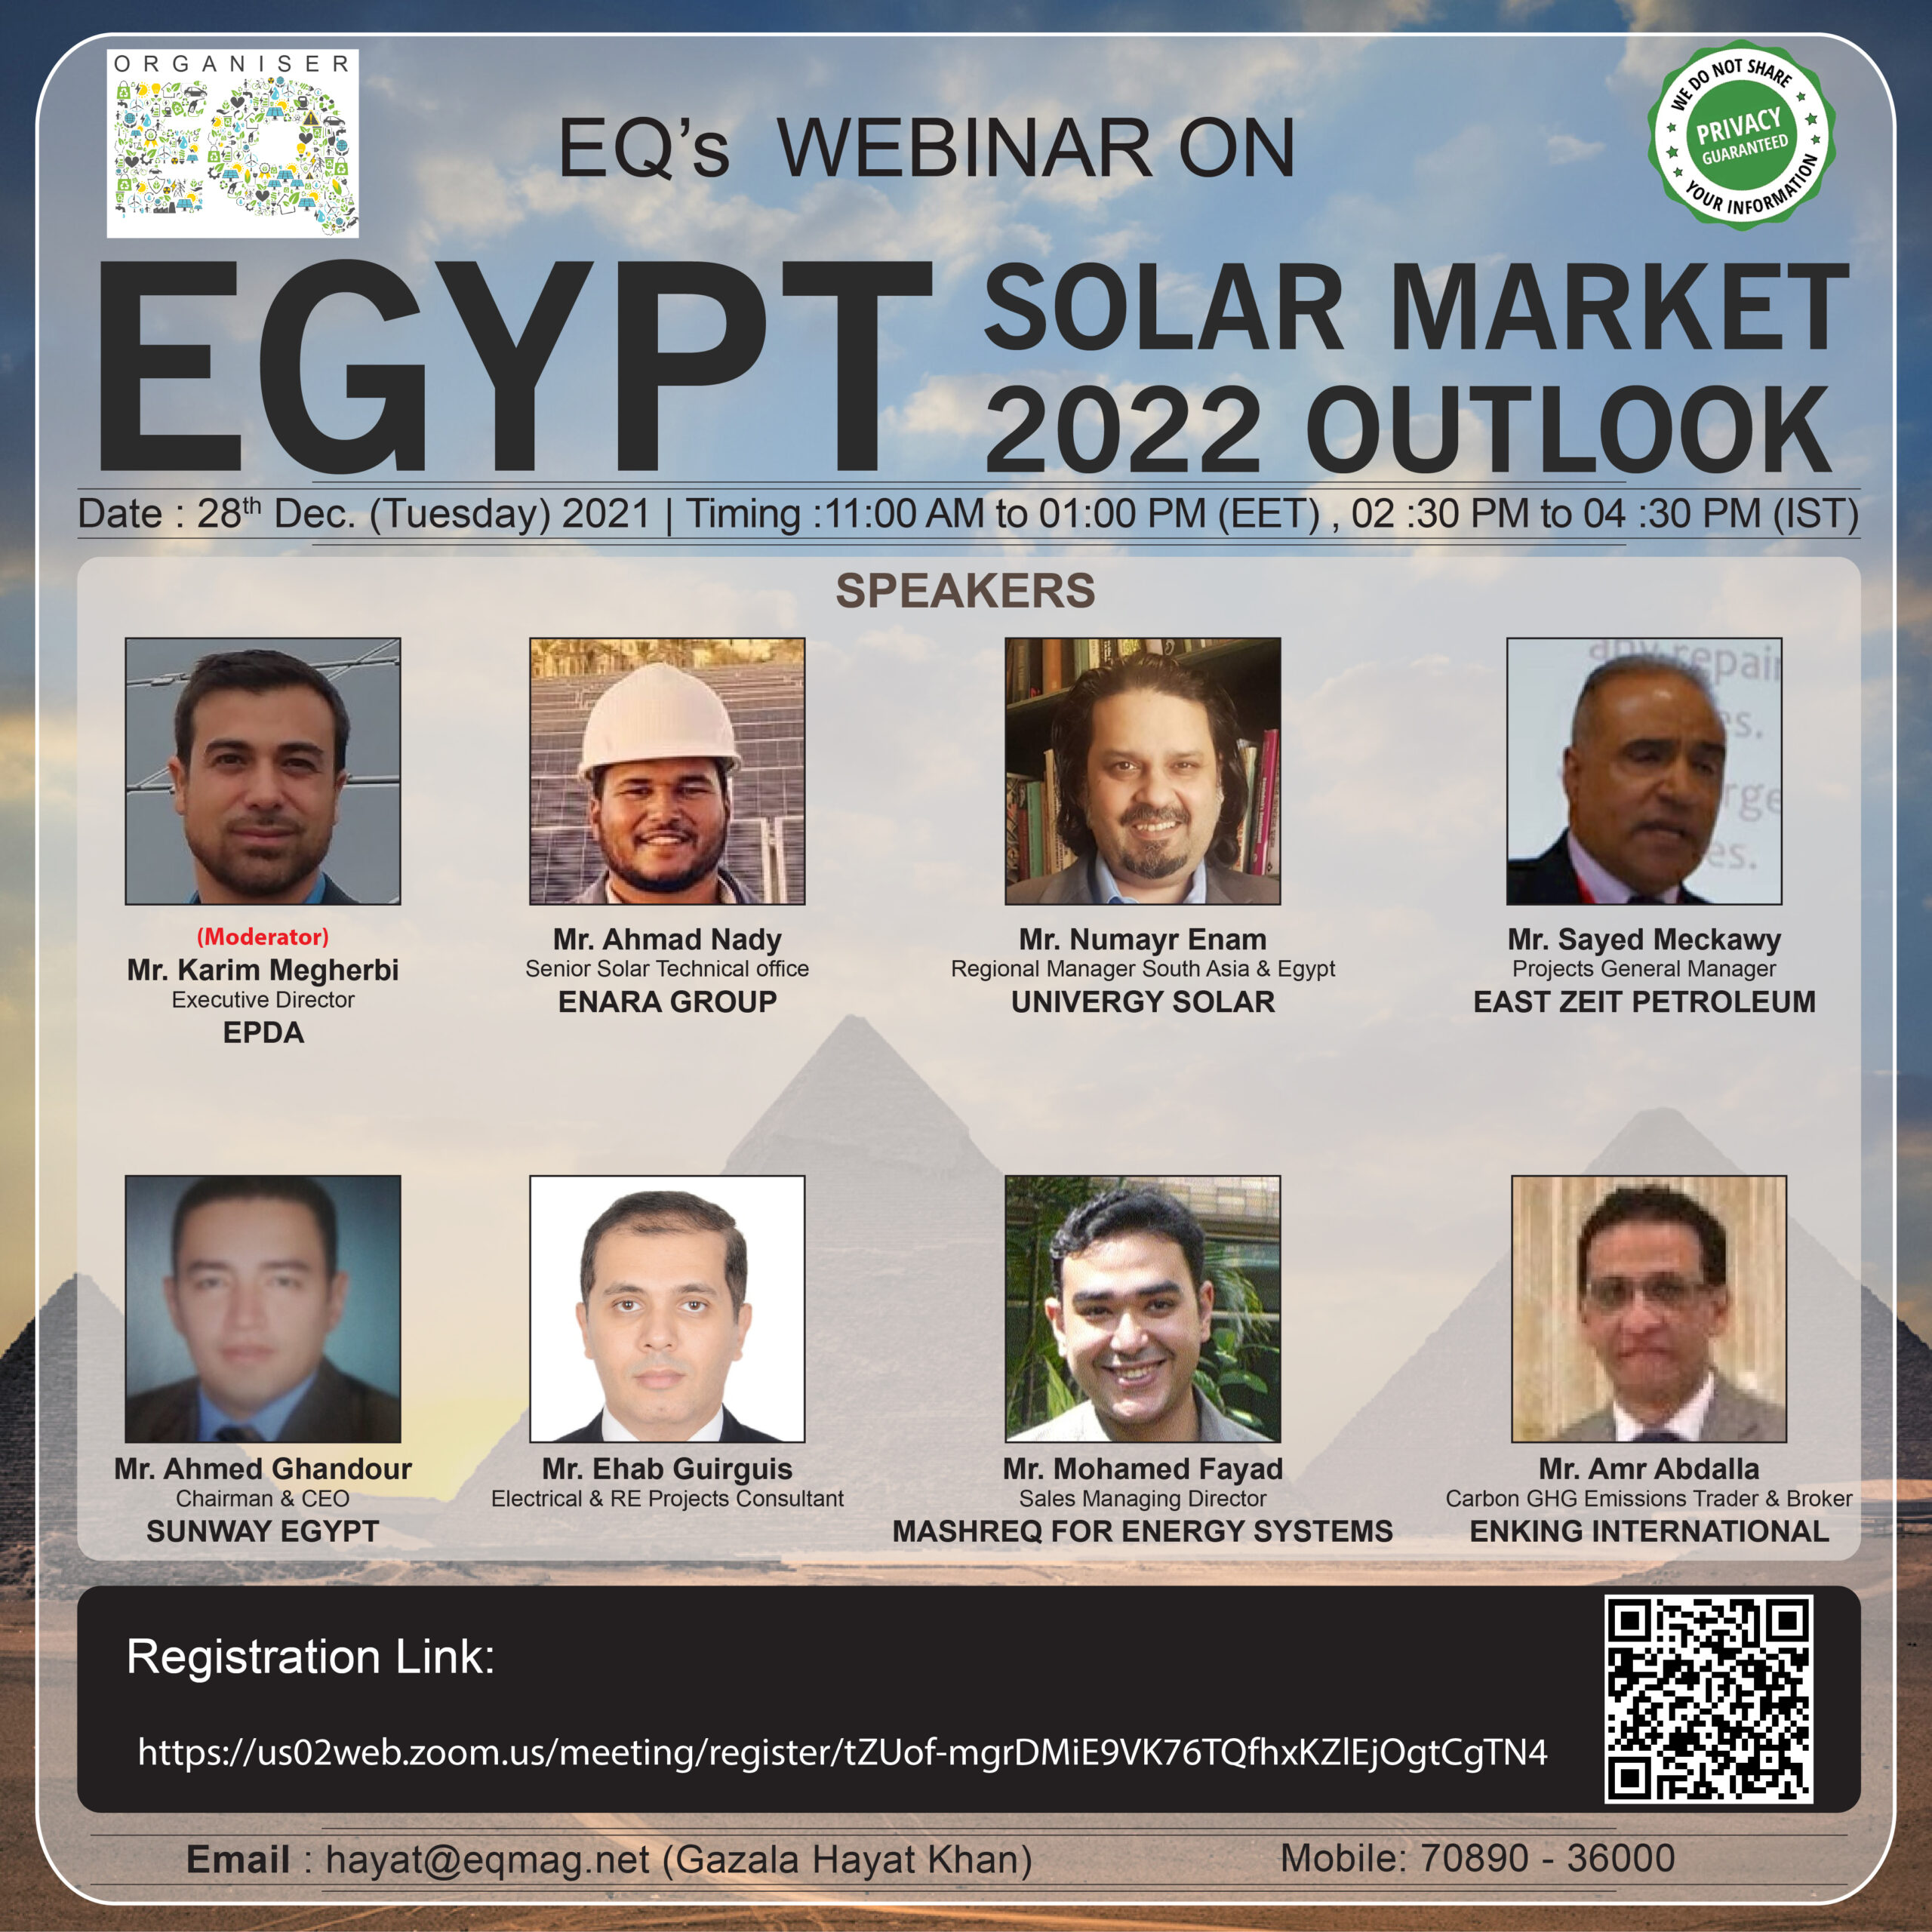 EQ Webinar on Egypt – Solar Market 2022 Outlook 28th December 2021(Tuesday) From 11:00 AM Onwards….Registered Now !!!